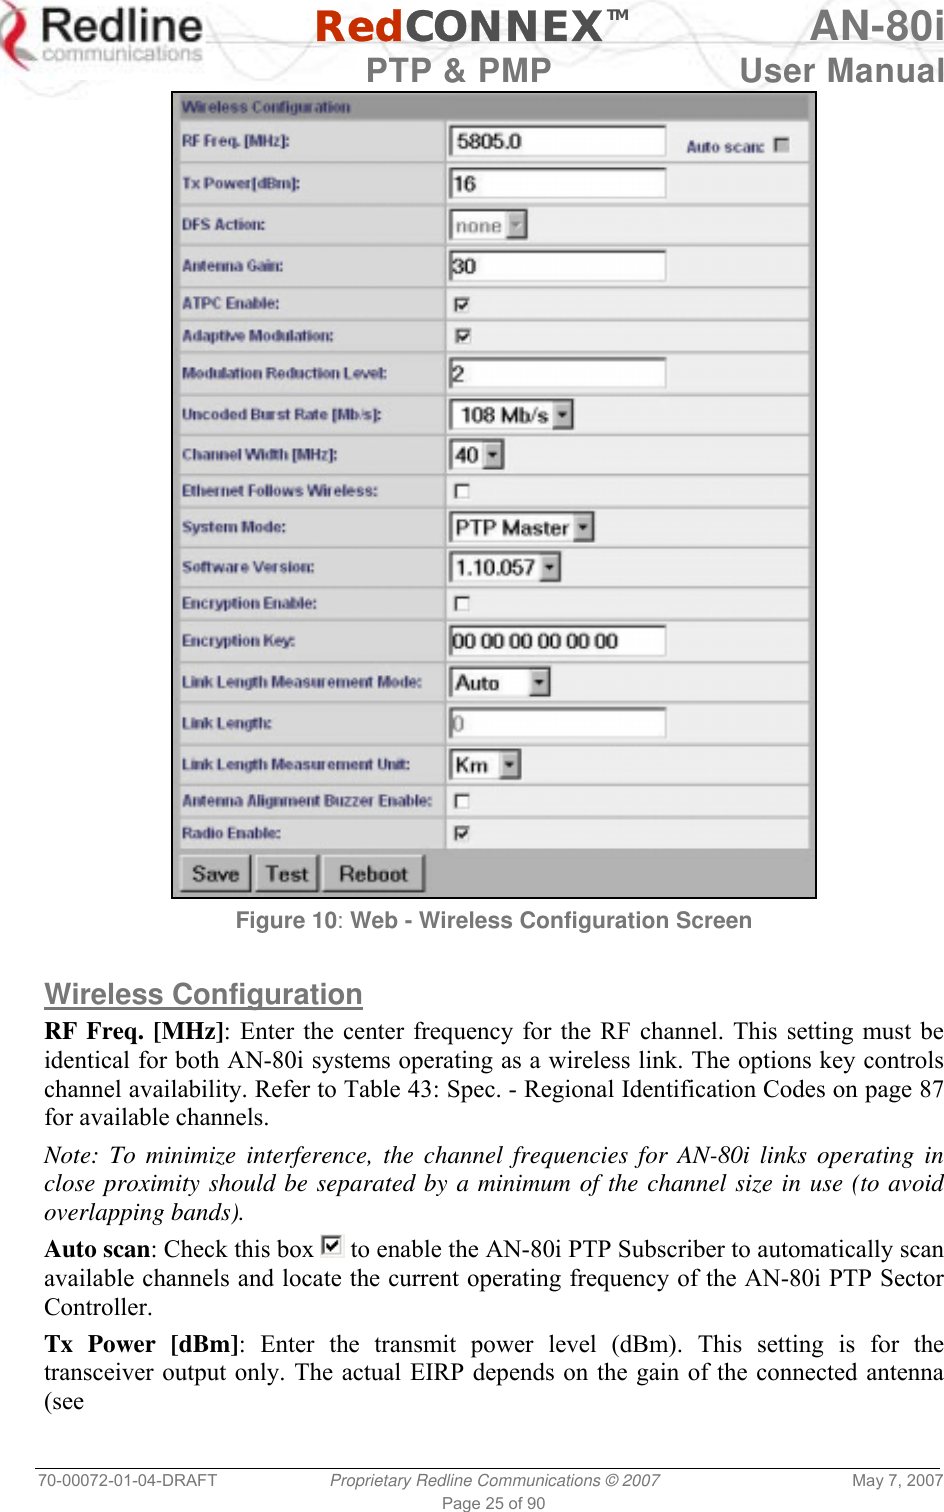   RedCONNEXTM AN-80i   PTP &amp; PMP  User Manual 70-00072-01-04-DRAFT  Proprietary Redline Communications © 2007  May 7, 2007 Page 25 of 90  Figure 10: Web - Wireless Configuration Screen  Wireless Configuration RF Freq. [MHz]: Enter the center frequency for the RF channel. This setting must be identical for both AN-80i systems operating as a wireless link. The options key controls channel availability. Refer to Table 43: Spec. - Regional Identification Codes on page 87 for available channels. Note: To minimize interference, the channel frequencies for AN-80i links operating in close proximity should be separated by a minimum of the channel size in use (to avoid overlapping bands).  Auto scan: Check this box   to enable the AN-80i PTP Subscriber to automatically scan available channels and locate the current operating frequency of the AN-80i PTP Sector Controller. Tx Power [dBm]: Enter the transmit power level (dBm). This setting is for the transceiver output only. The actual EIRP depends on the gain of the connected antenna (see 